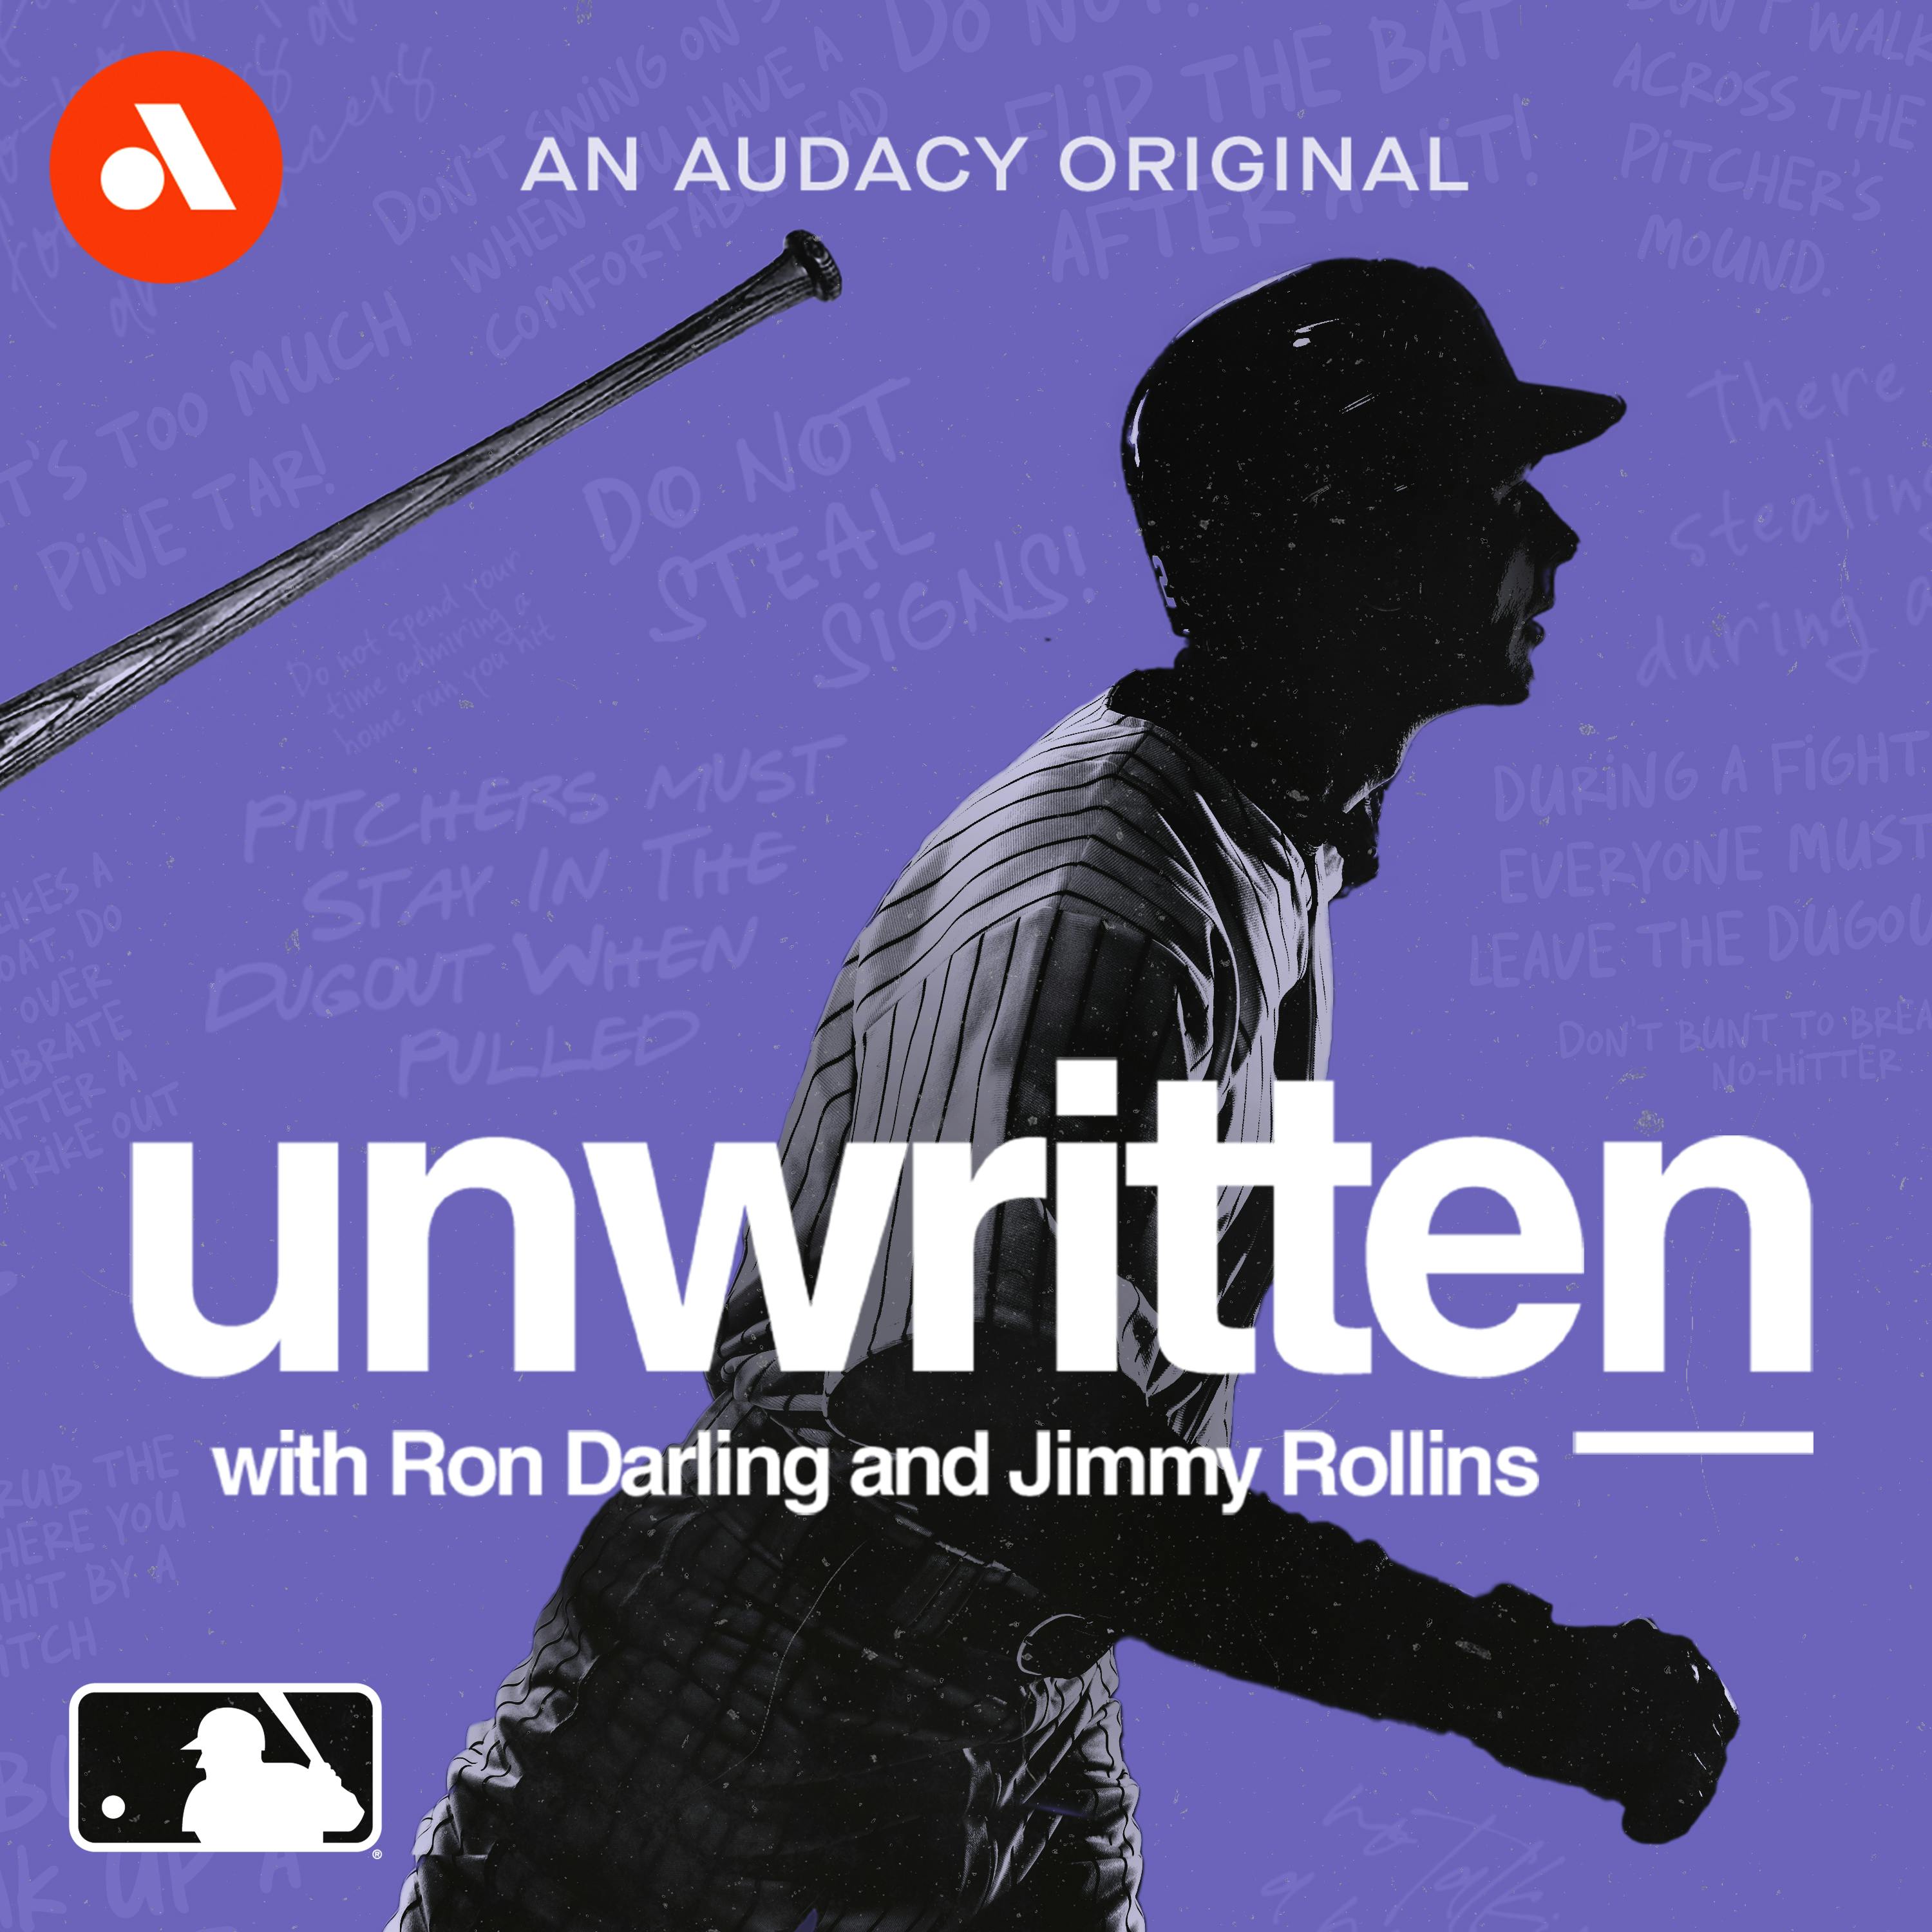 Episode 7 - How to talk to Umpires feat. Fieldin Culbreth